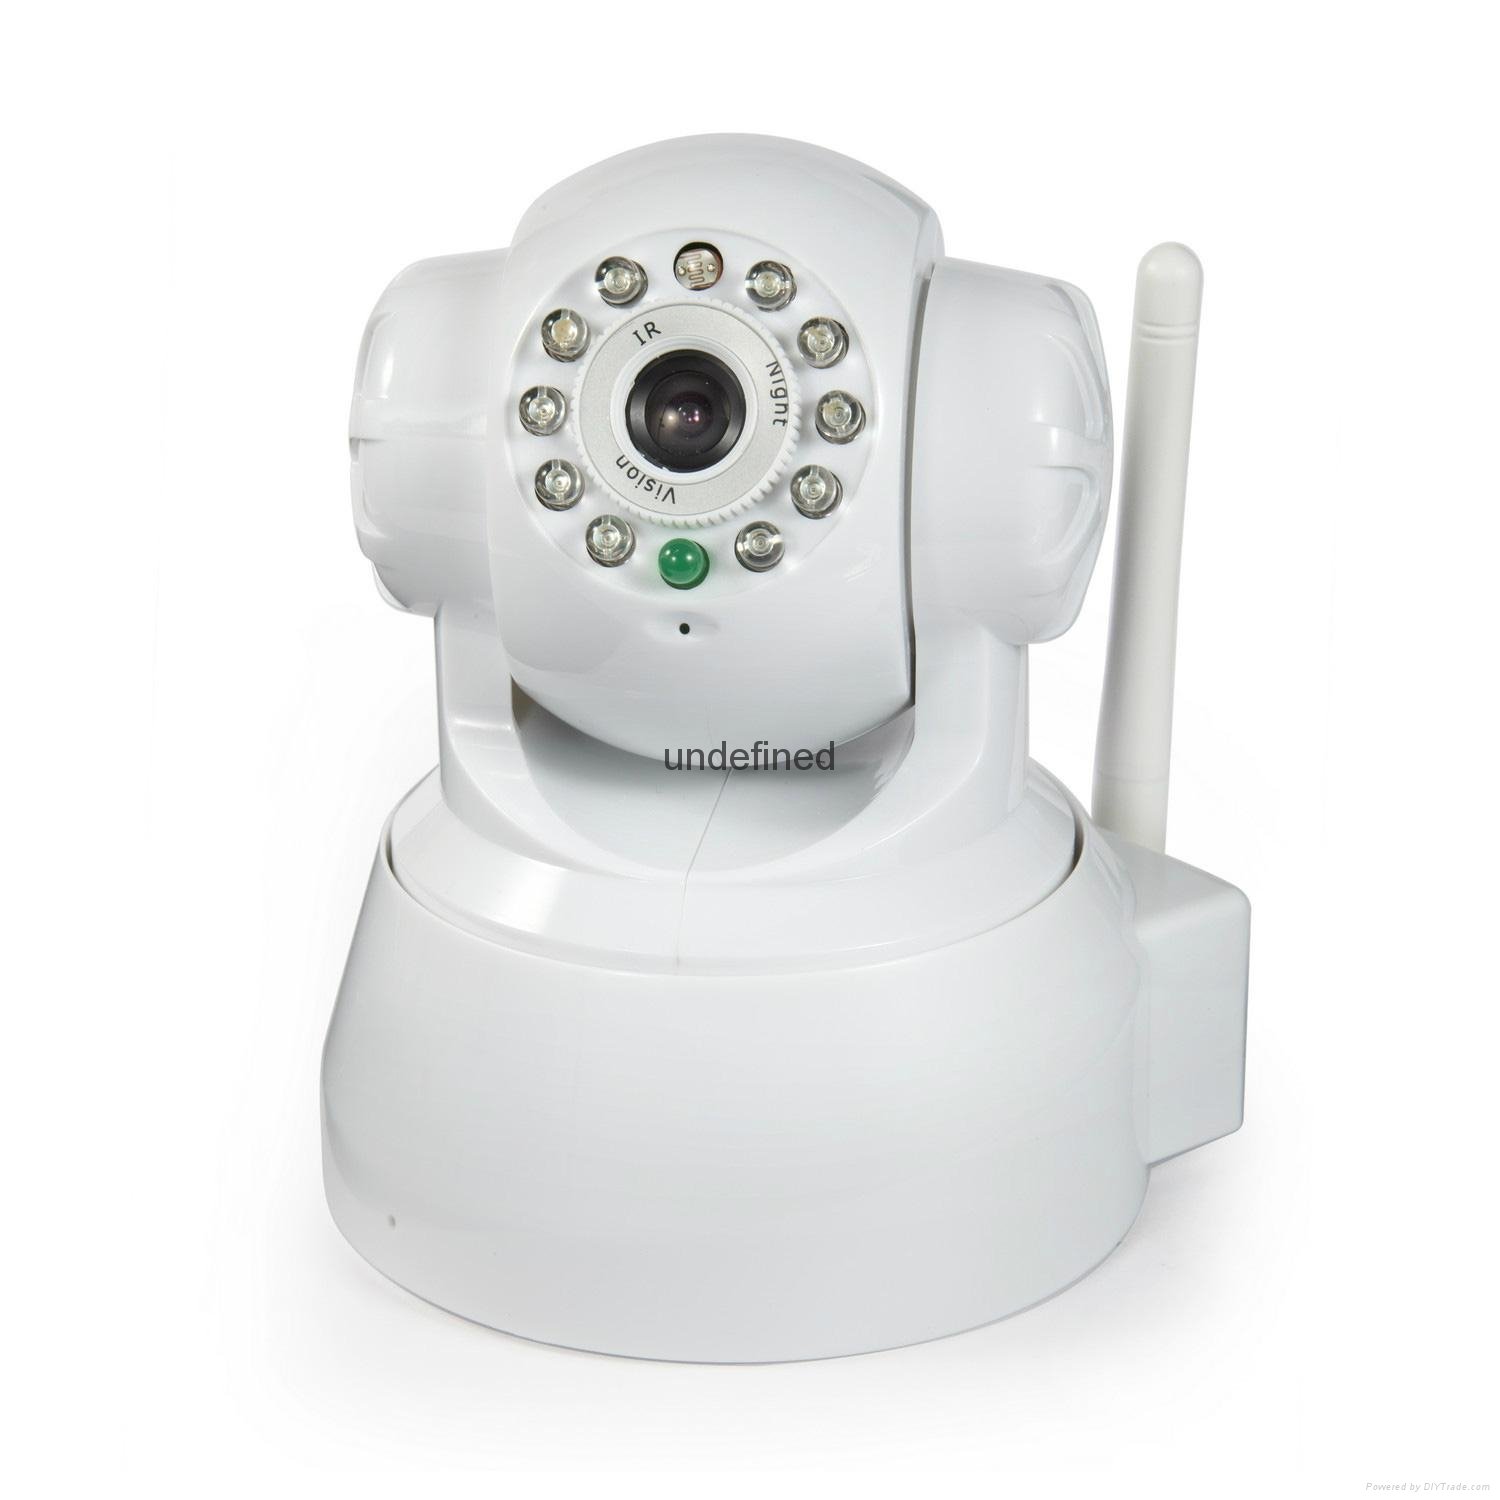 Alytimes Aly001 indoor pt wifi network baby monitor network ip cam